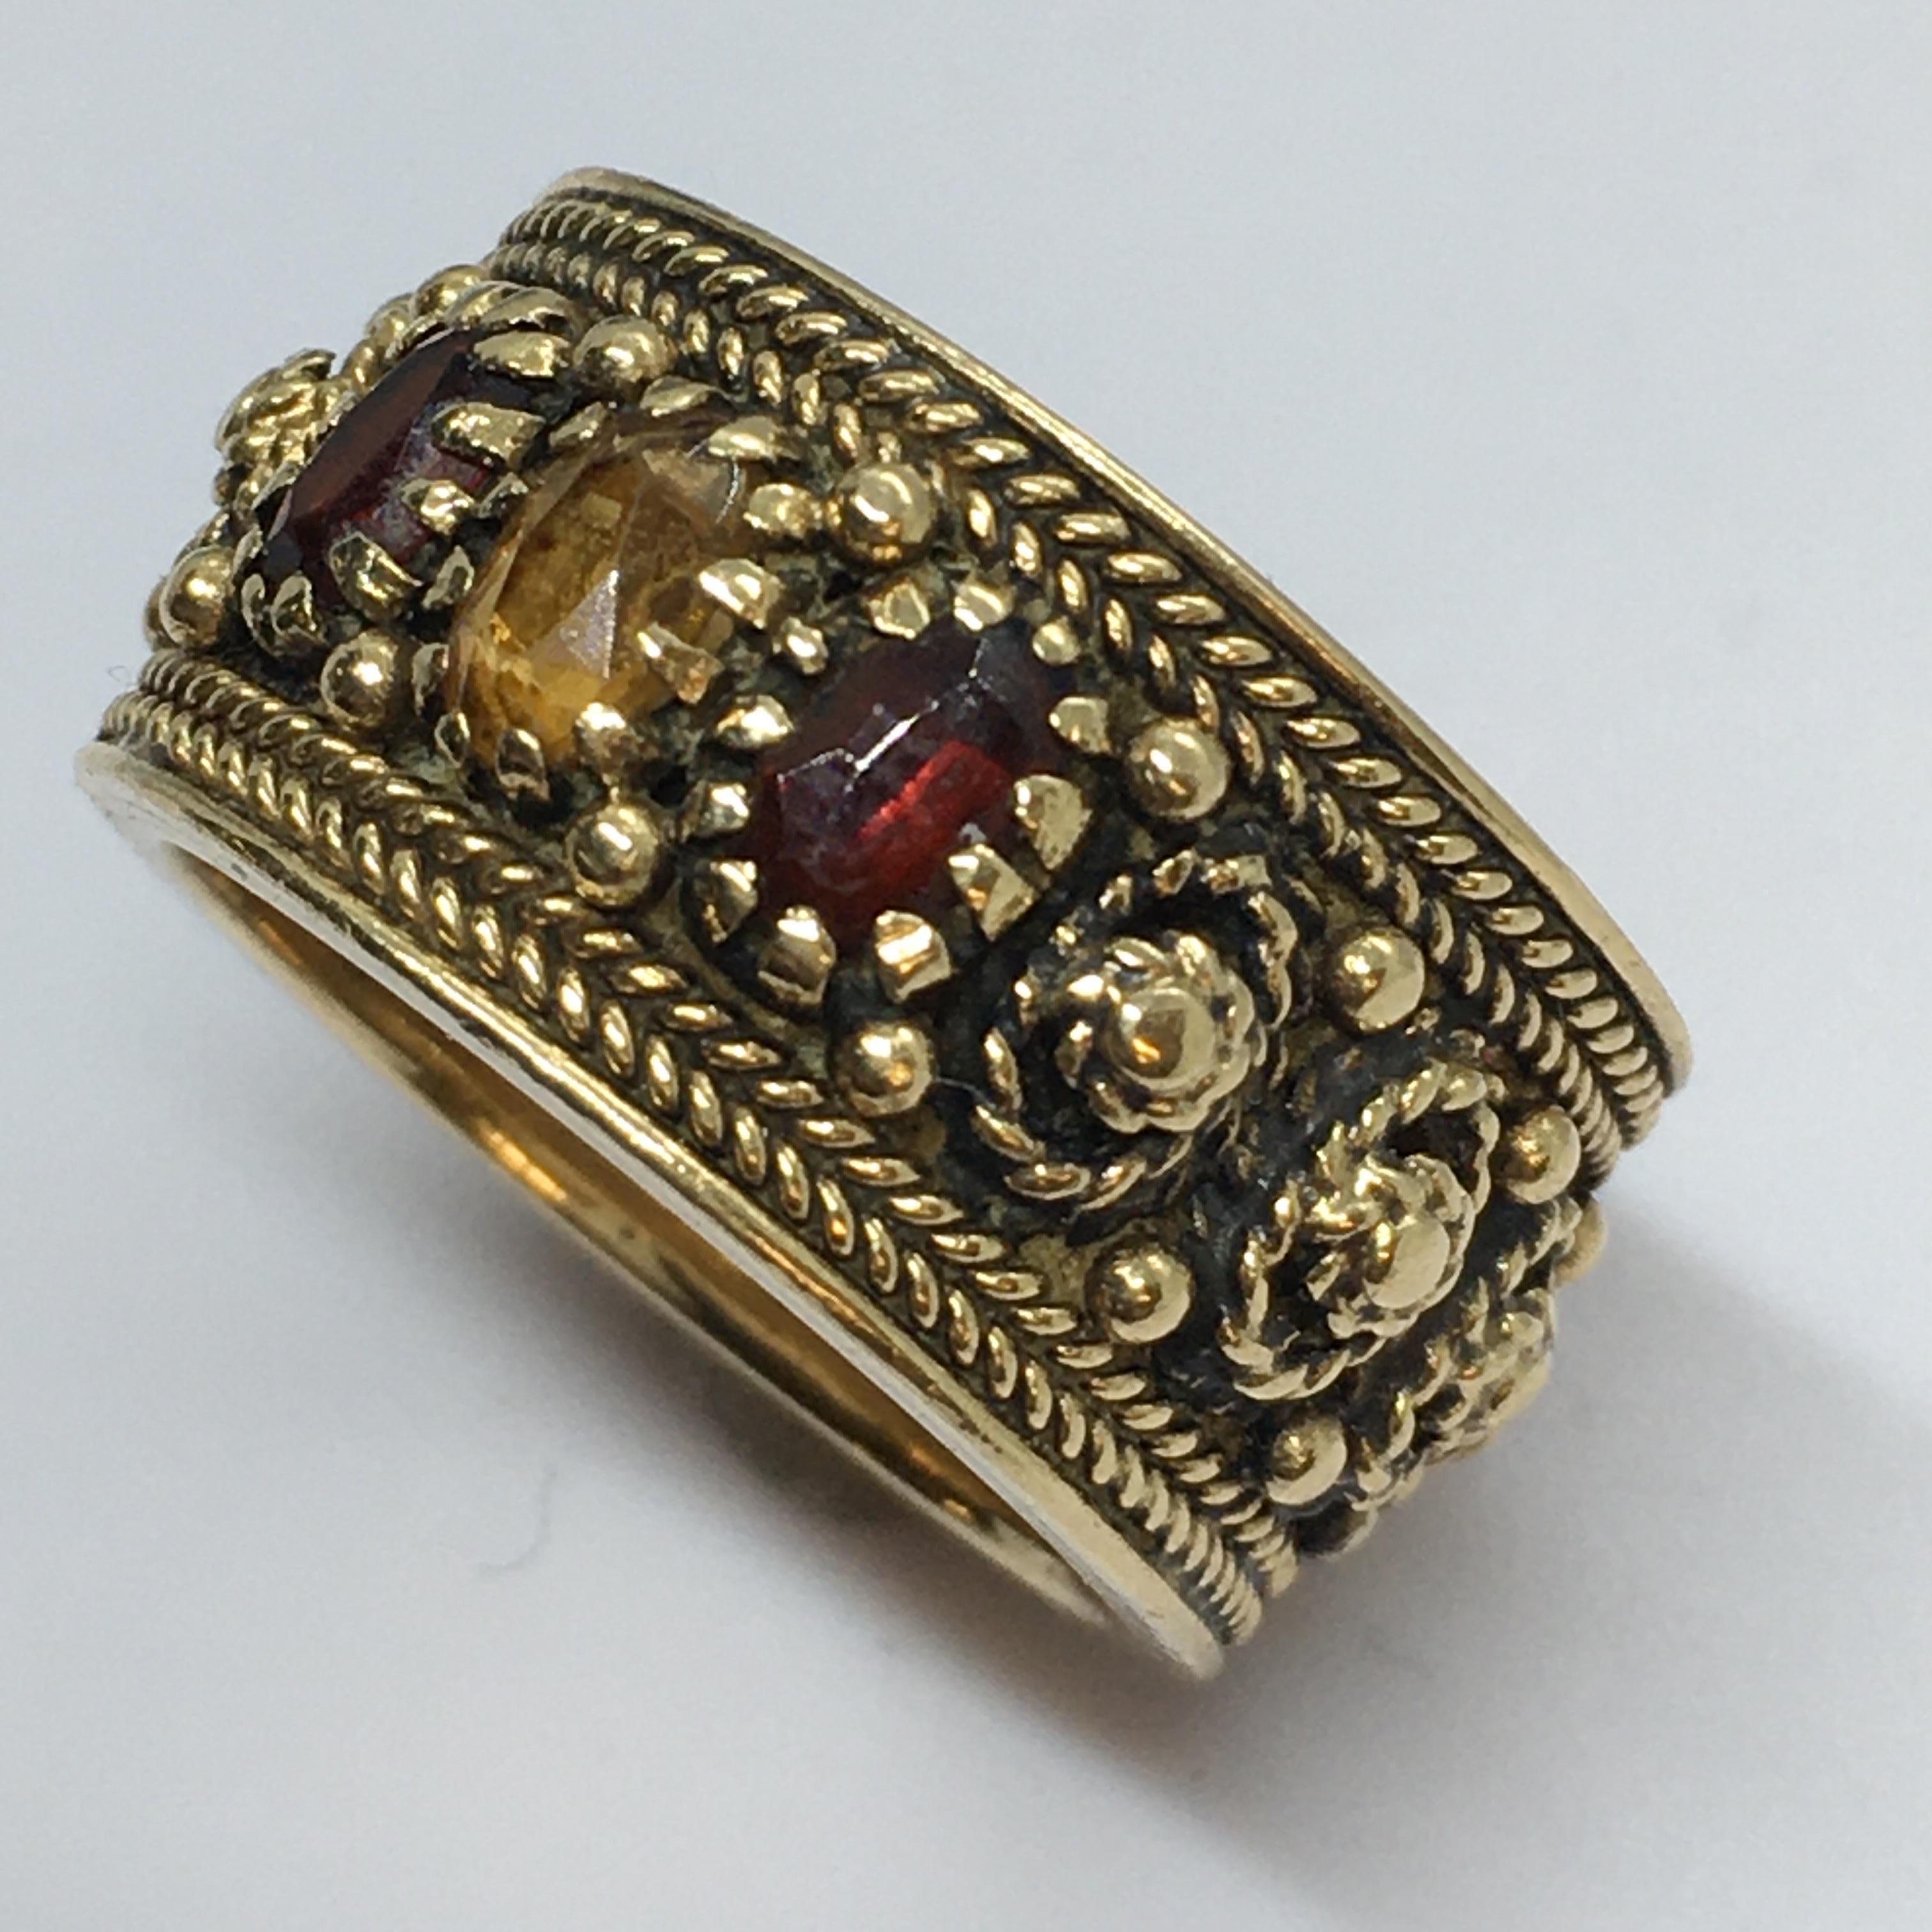 Art Deco 14K gold band Garnet Citrine extensive bead work 

8.7 gram
Size 5.75
11mm or 1/4 inch wide
3mm by 5mm stones 
No damage, no evidence of repairs, see pictures 